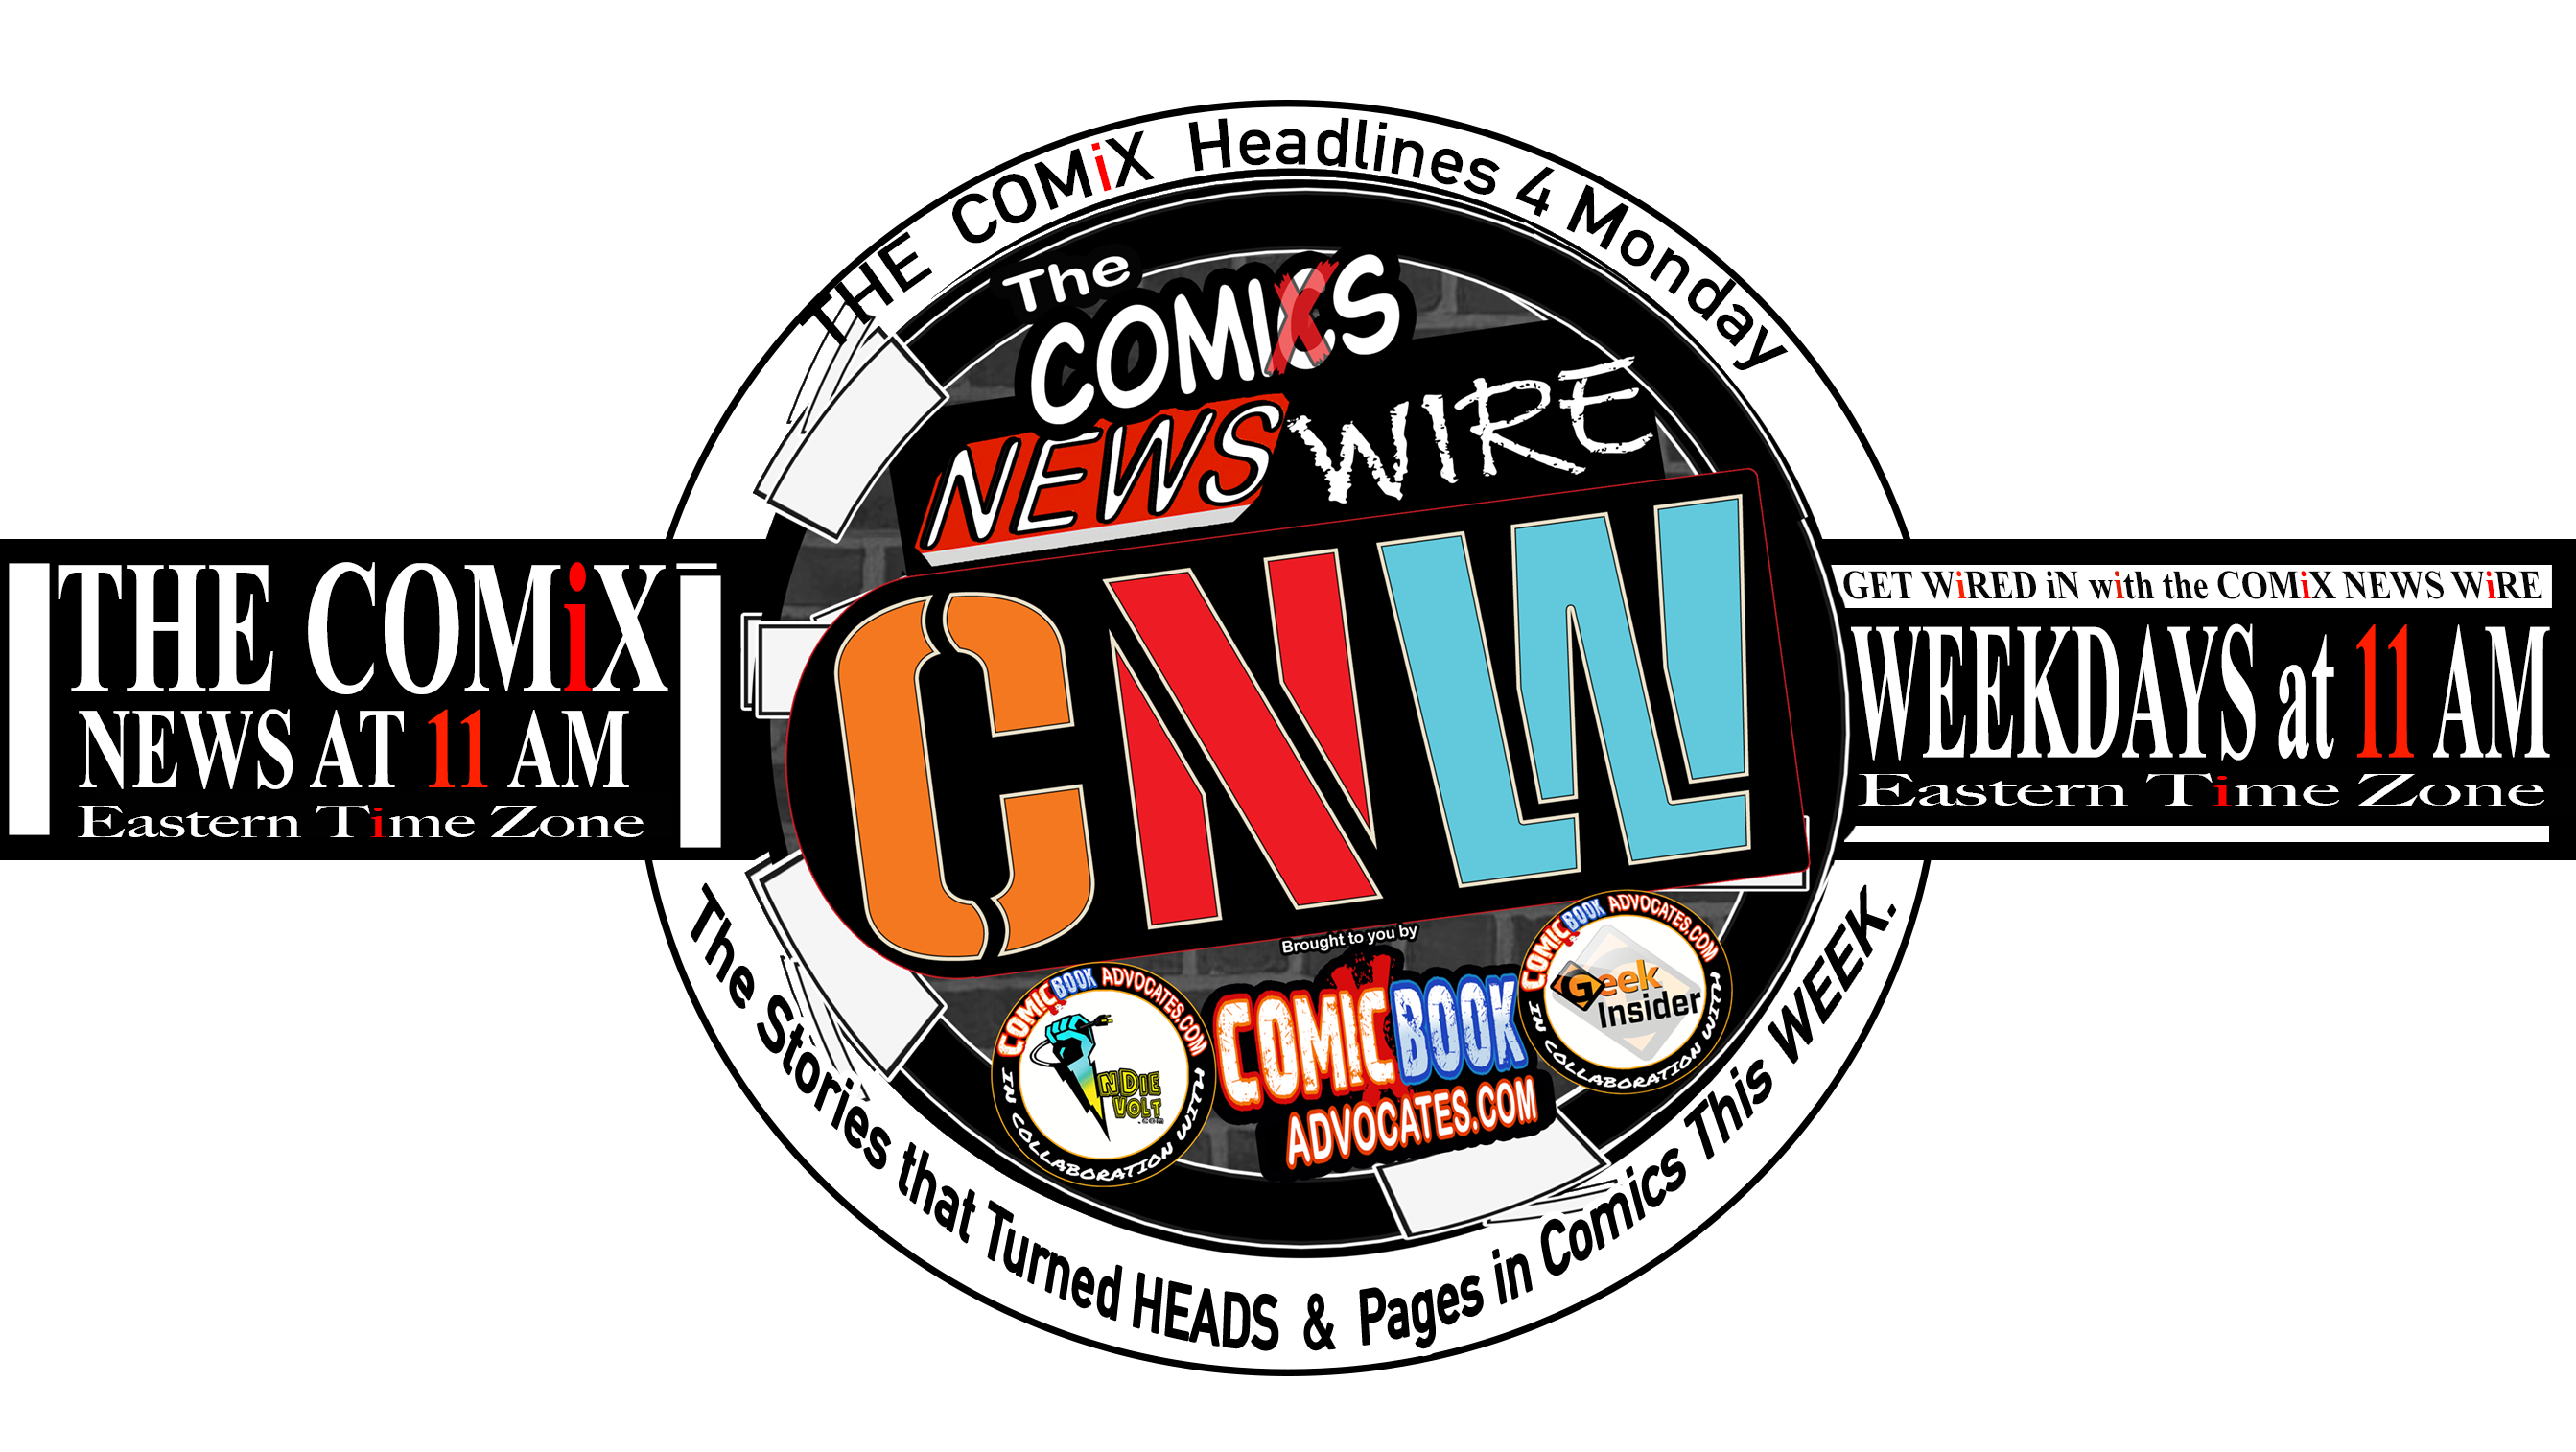 MONDAY’s RUNDOWN for CNW NEWS AT 11 am ET – 10.19.20- It’s beginning to look a lot like Halloween